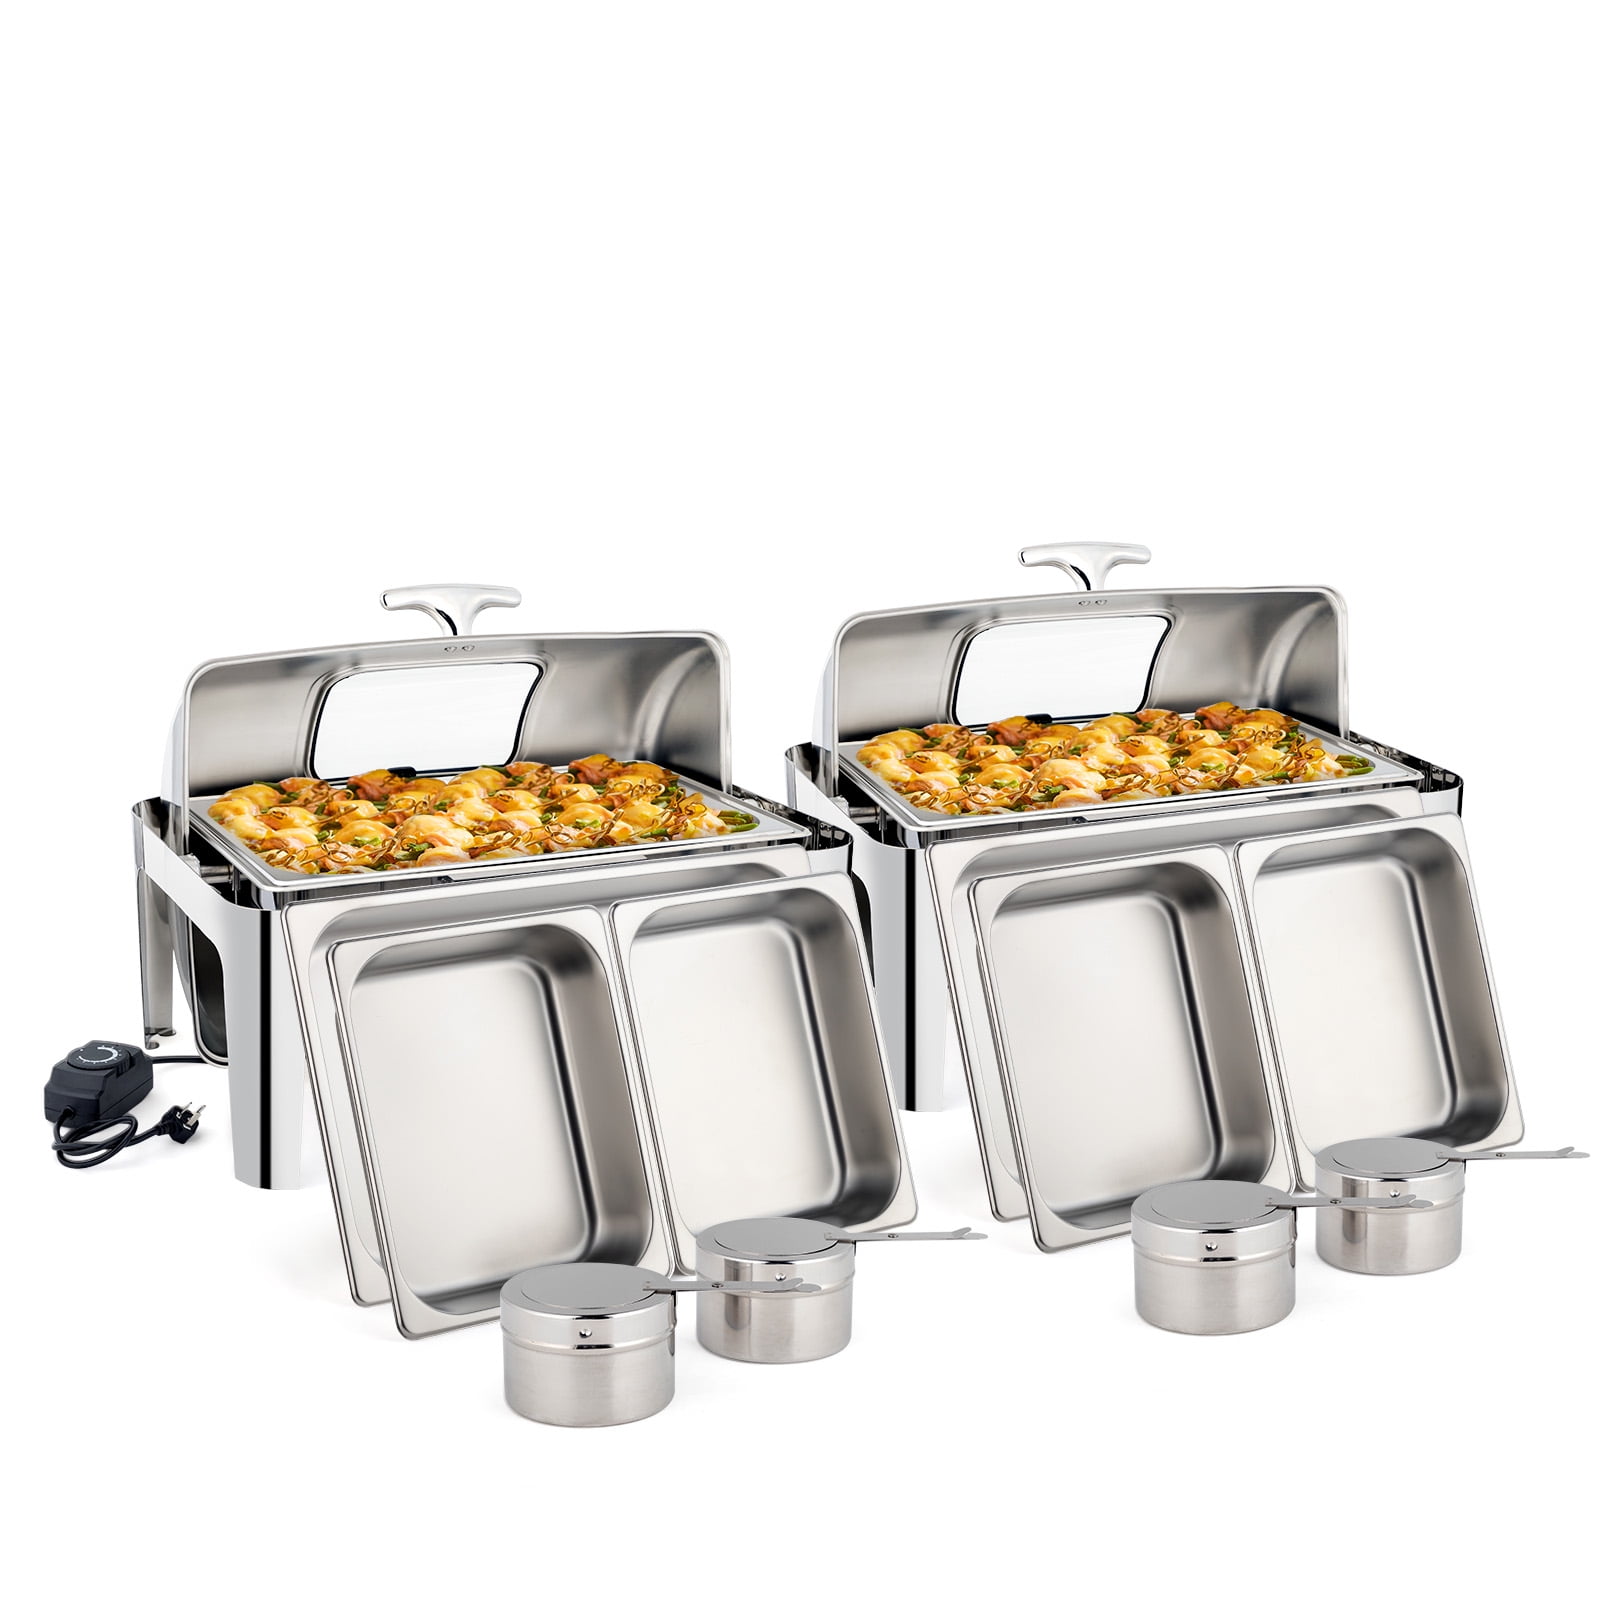 THXSUN Electric Chafing Dish, 3 x 3qt Size Electric Chafing Dish Buffet Set with Rotary Knob Adjustable Temp 0°C~100°C, 700W Buffet Servers and